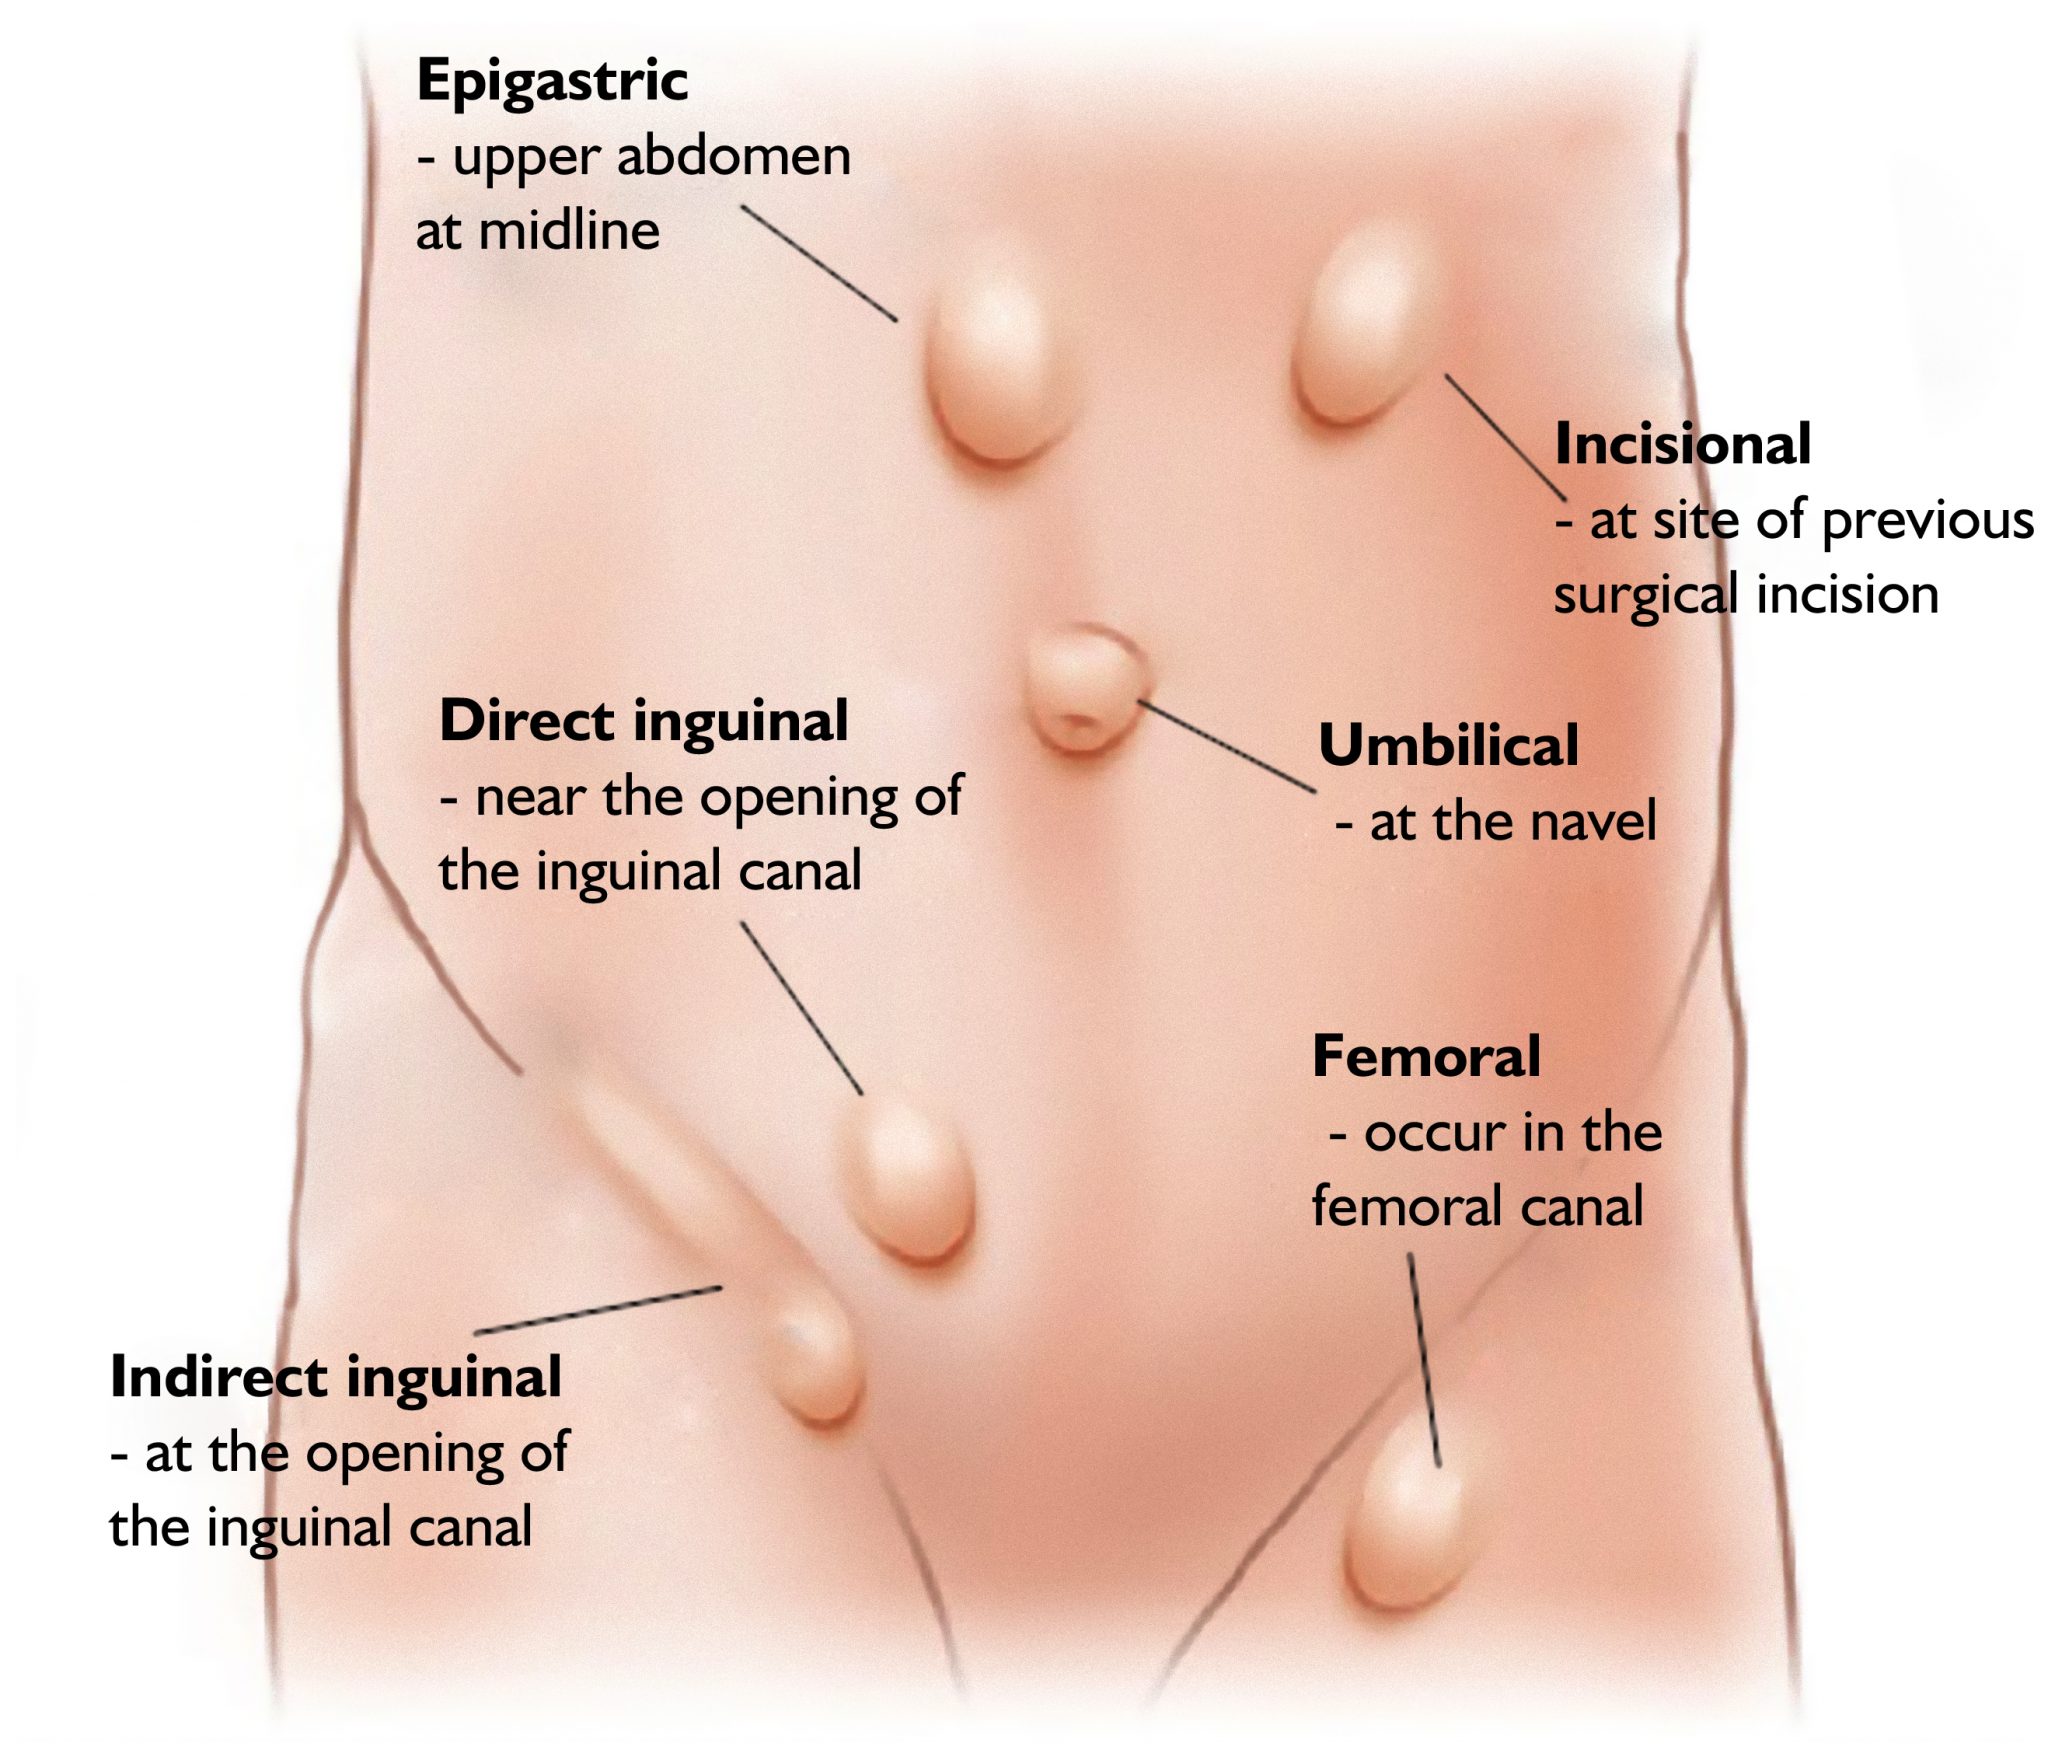 Umbilical Hernia: Its Complications and Treatment